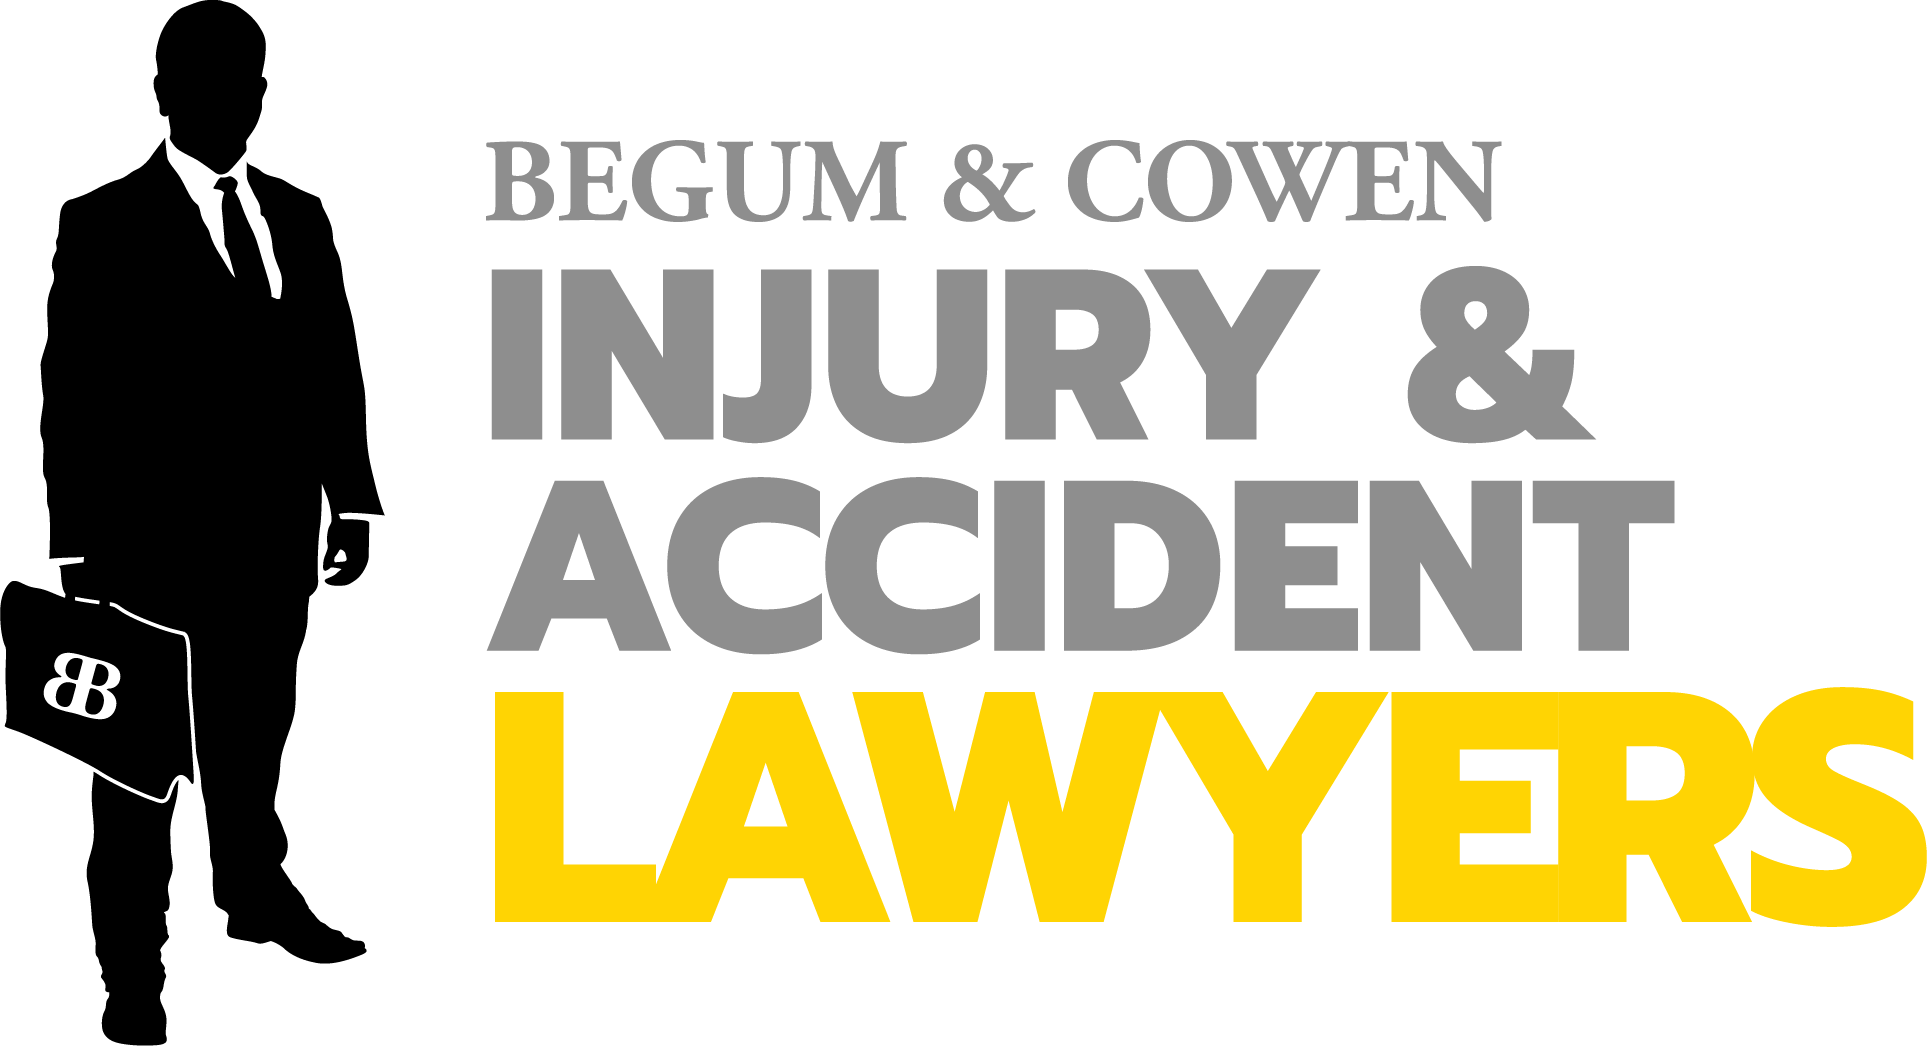 Begum & Cowen Injury & Accident Lawyers